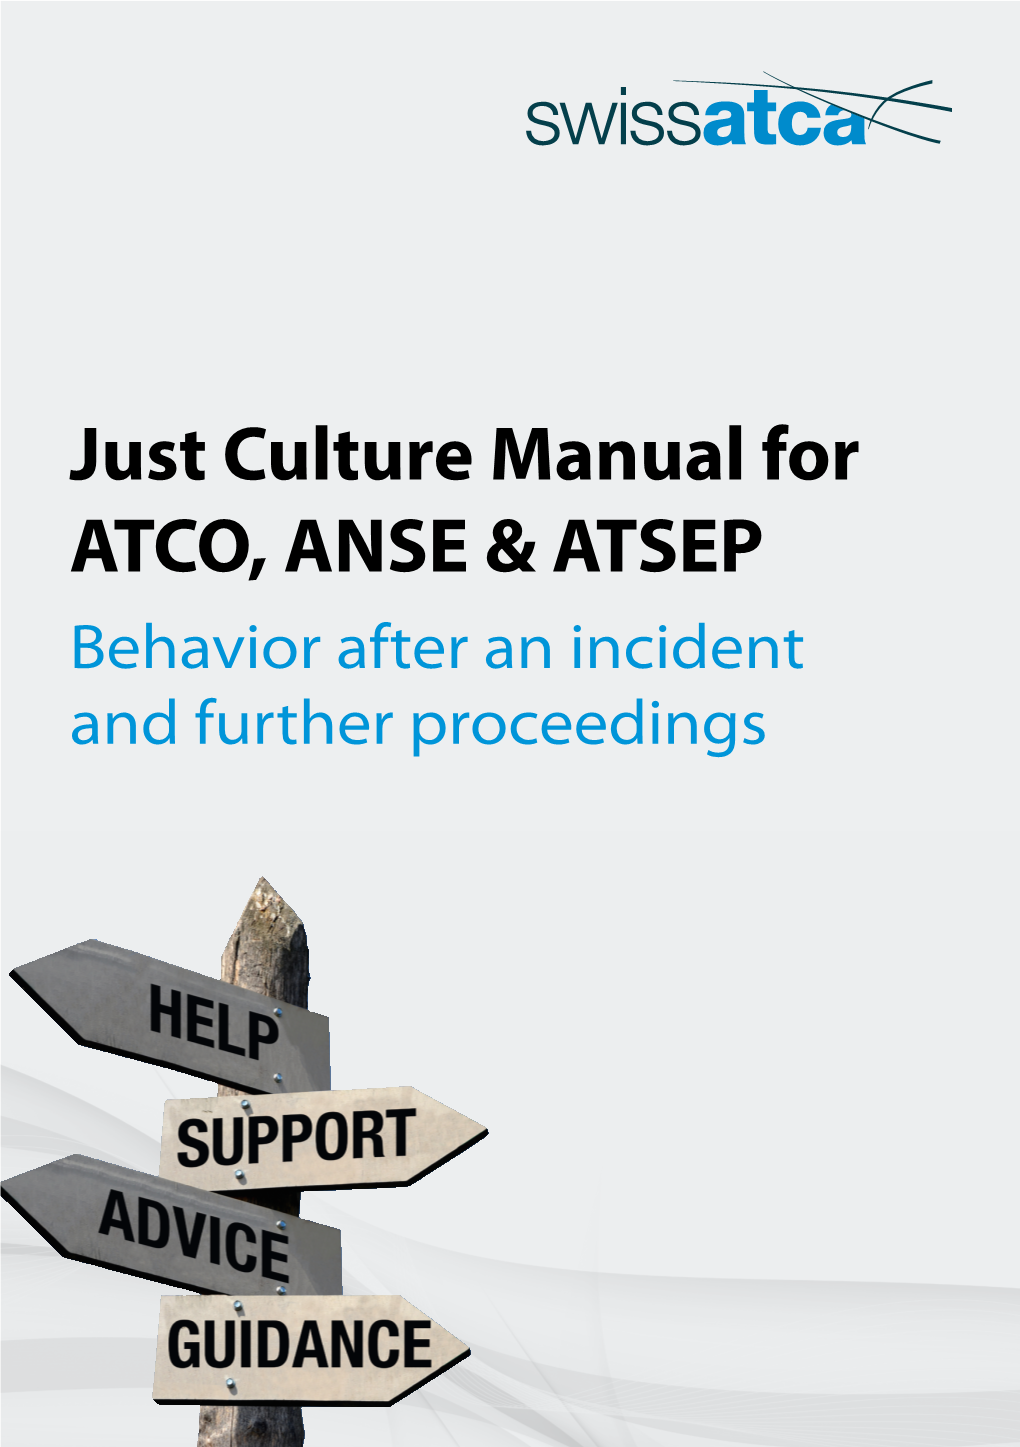 Just Culture Manual for ATCO, ANSE & ATSEP